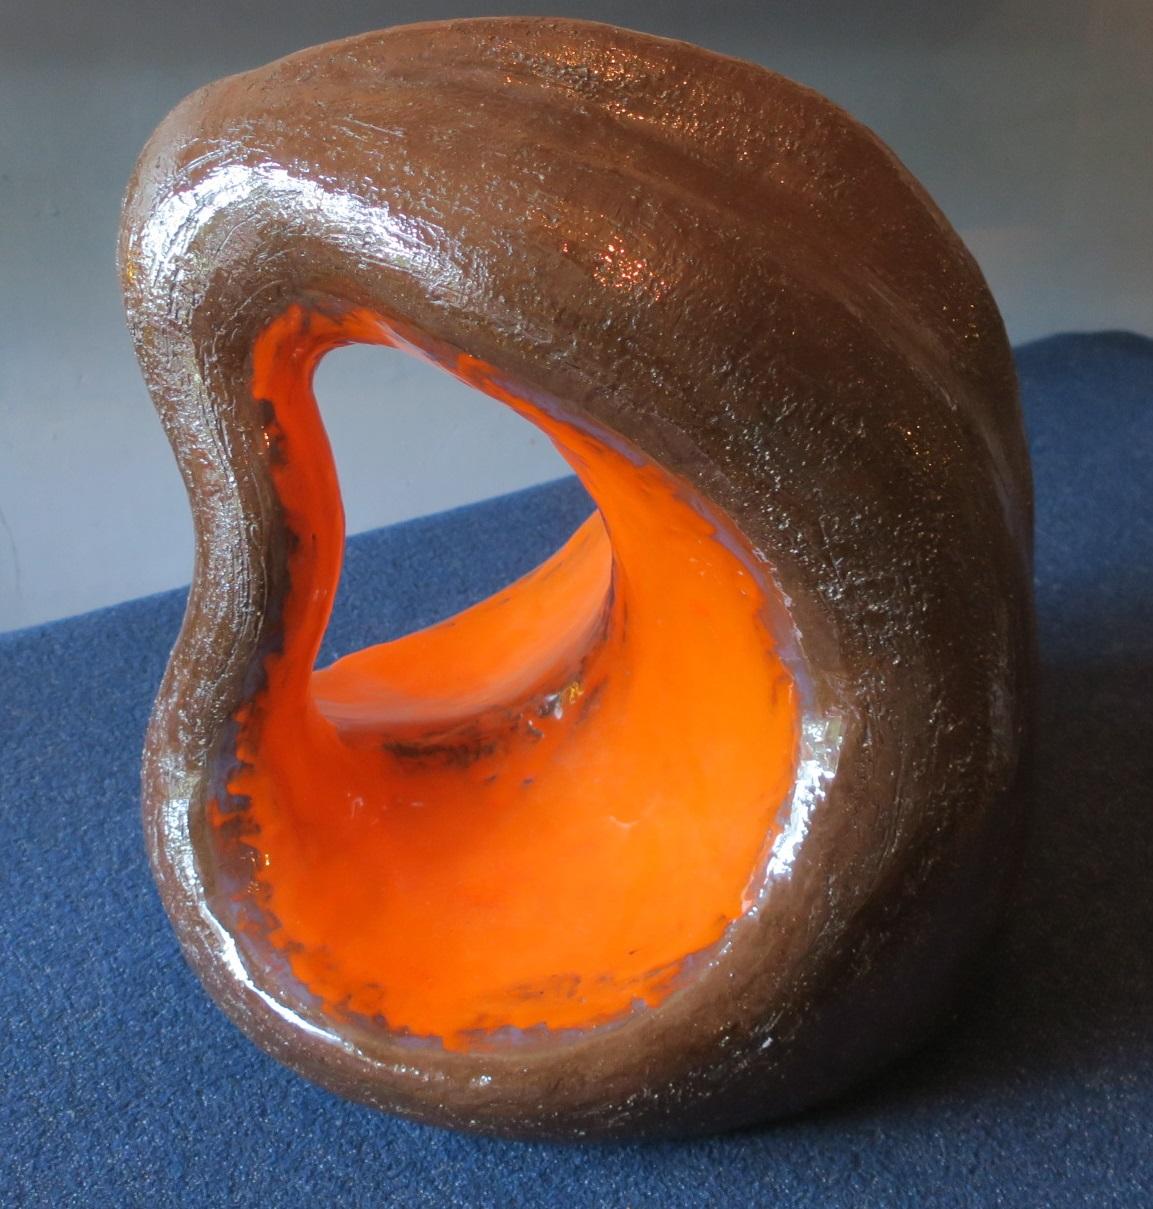 Ceramic sculpture dating from about 1970 with organic, abstract, human-like form, signed 'CF' inside the rim underneath.